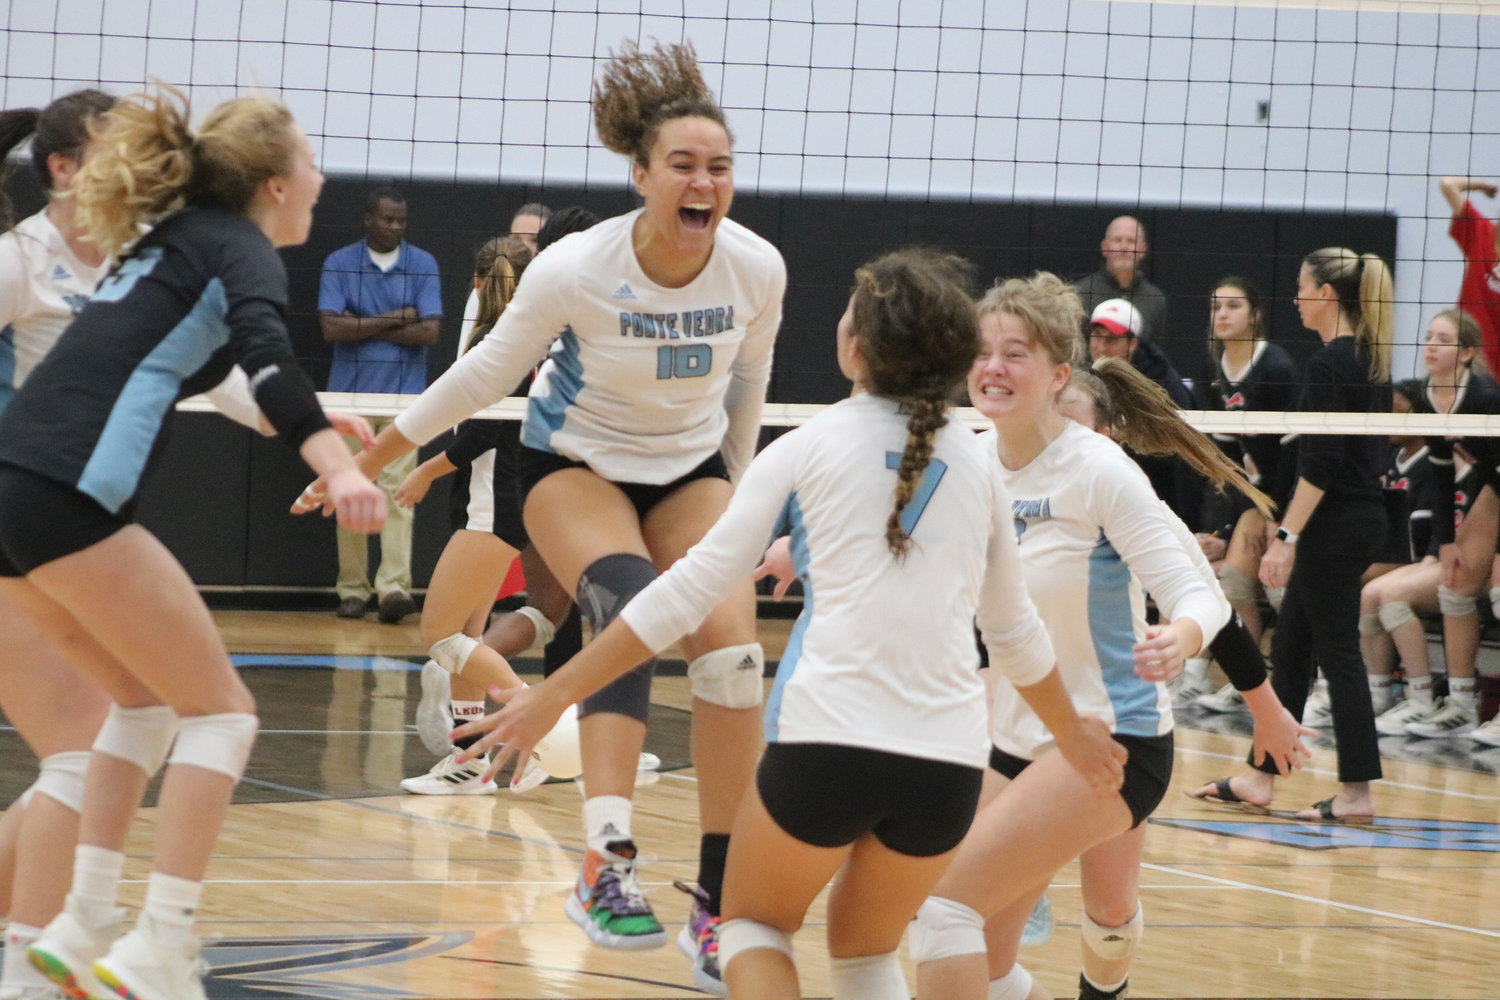 The Sharks celebrate after scoring the final point to beat Tallahassee Leon and advance to the Class 6A state semifinals. Ponte Vedra will play Viera in Fort Myers at 2 p.m. Nov. 13.